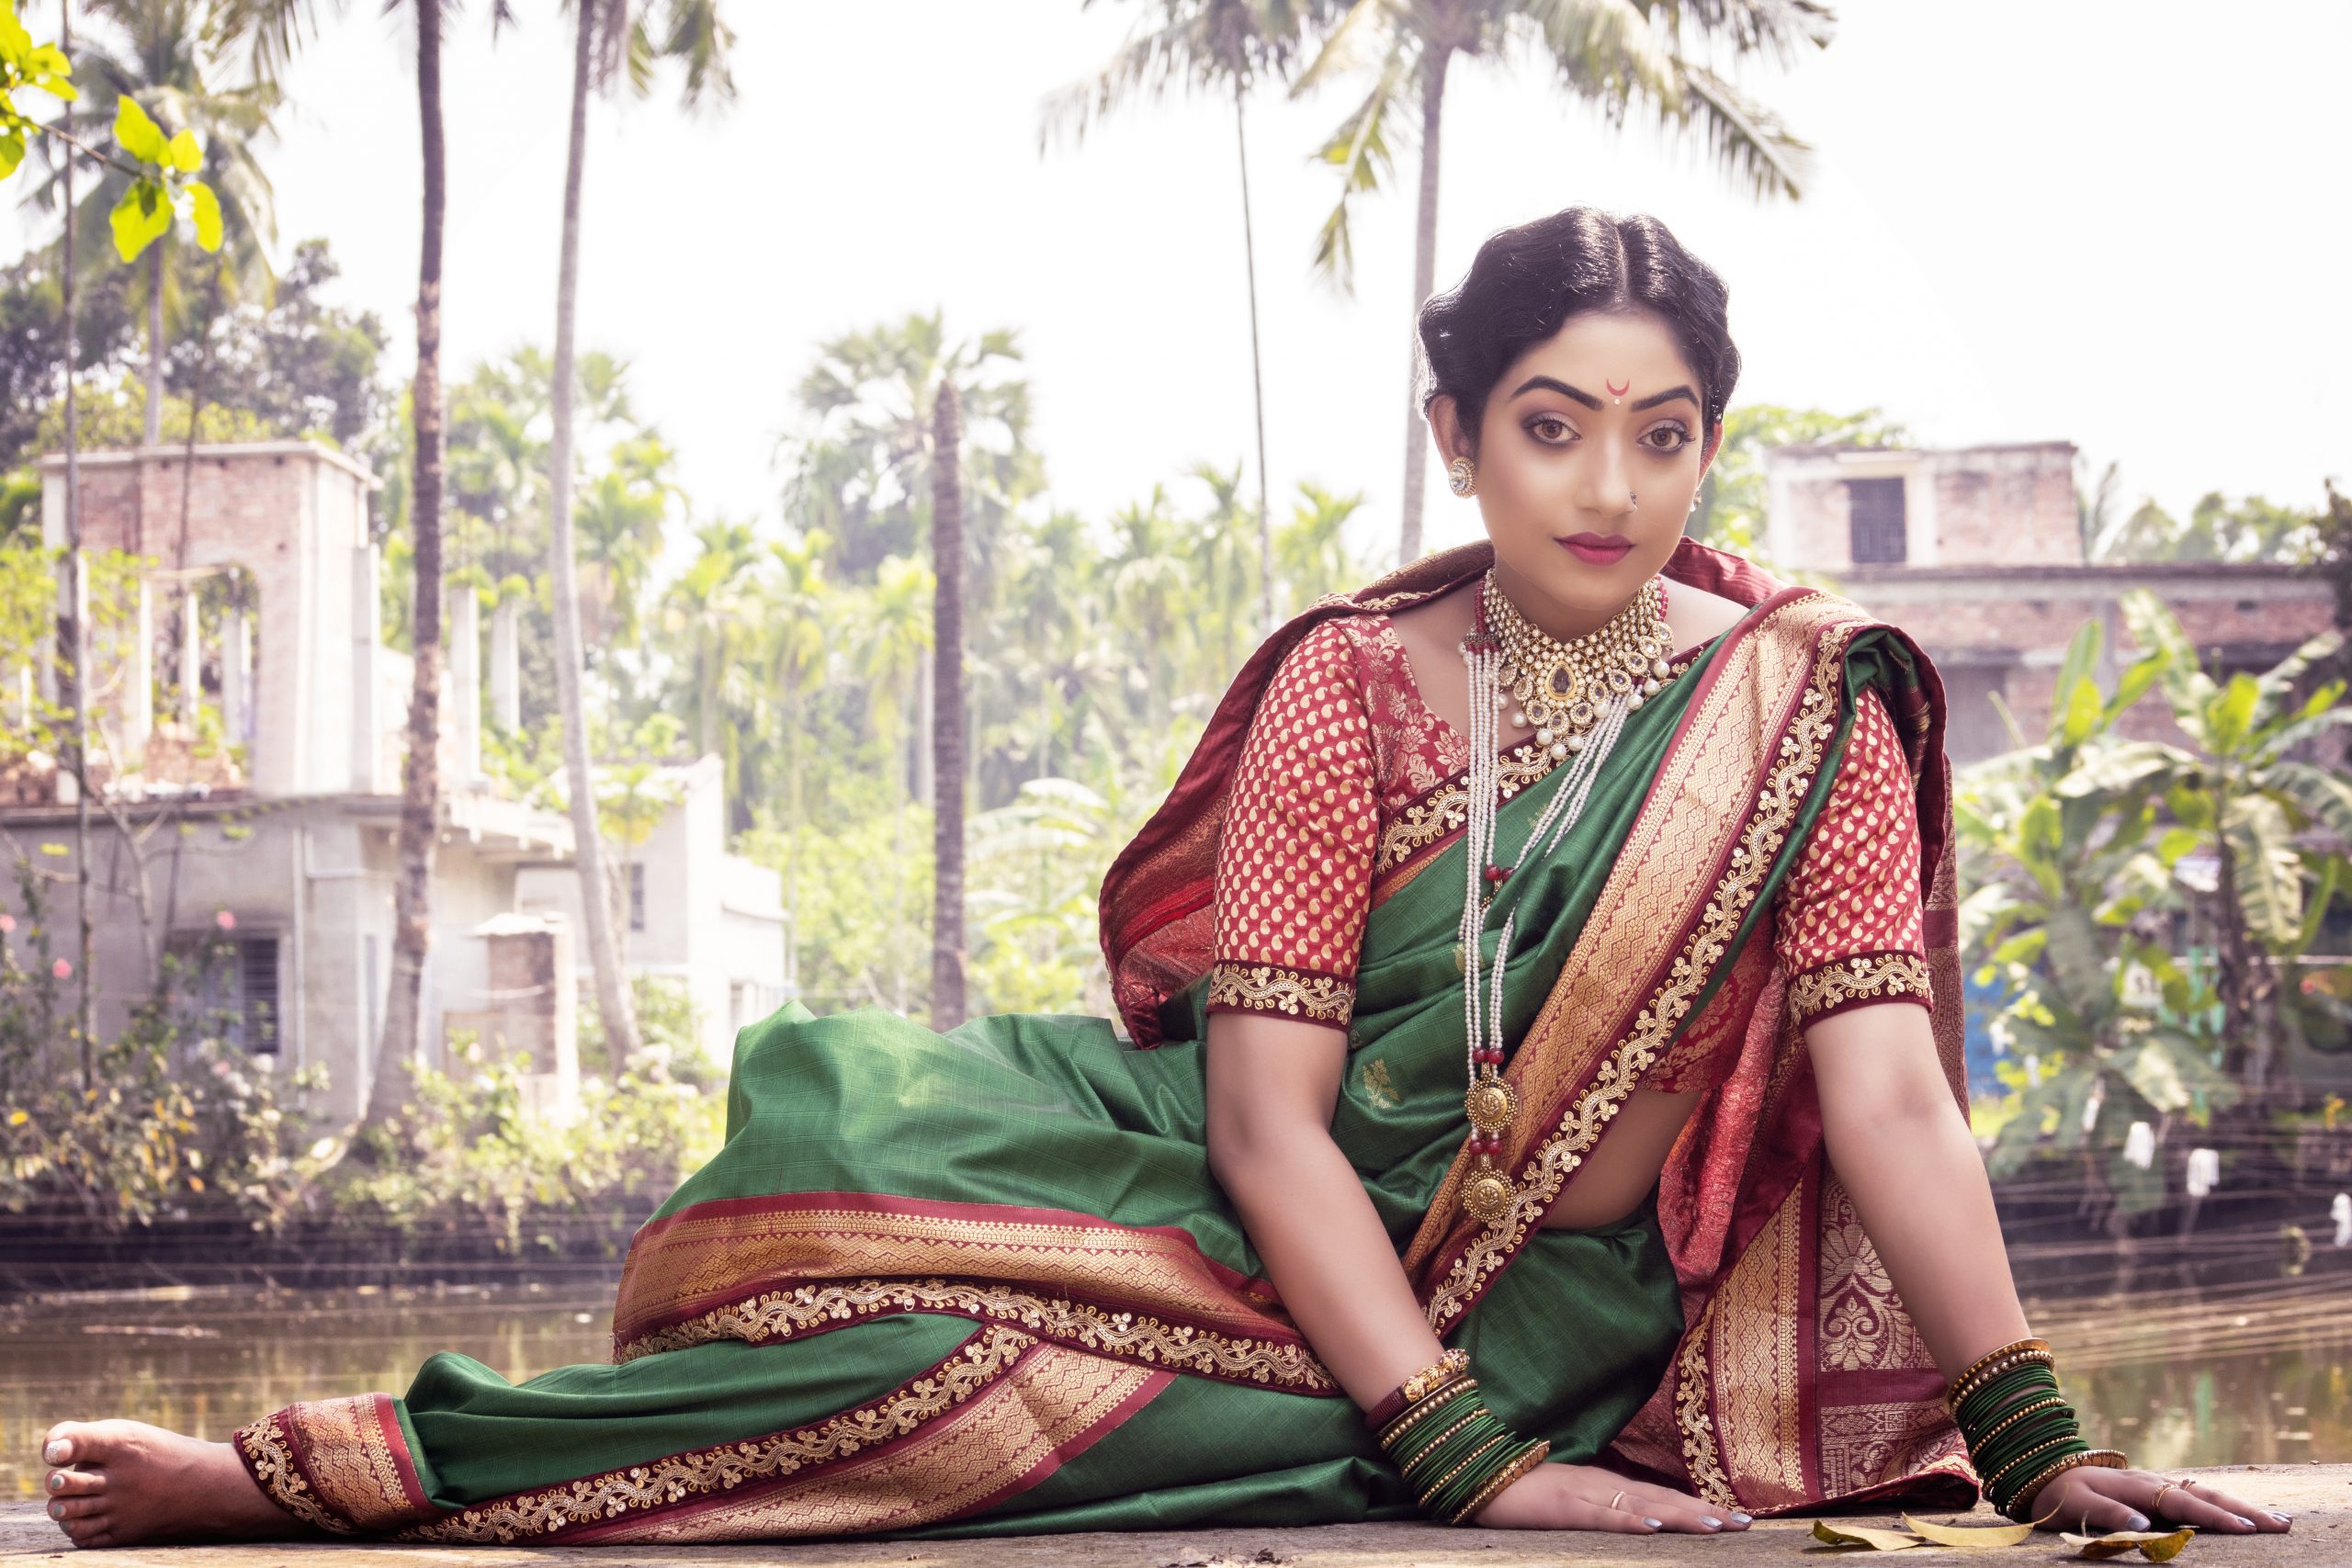 100+ best saree captions for Instagram photos of the traditional wear -  Tuko.co.ke